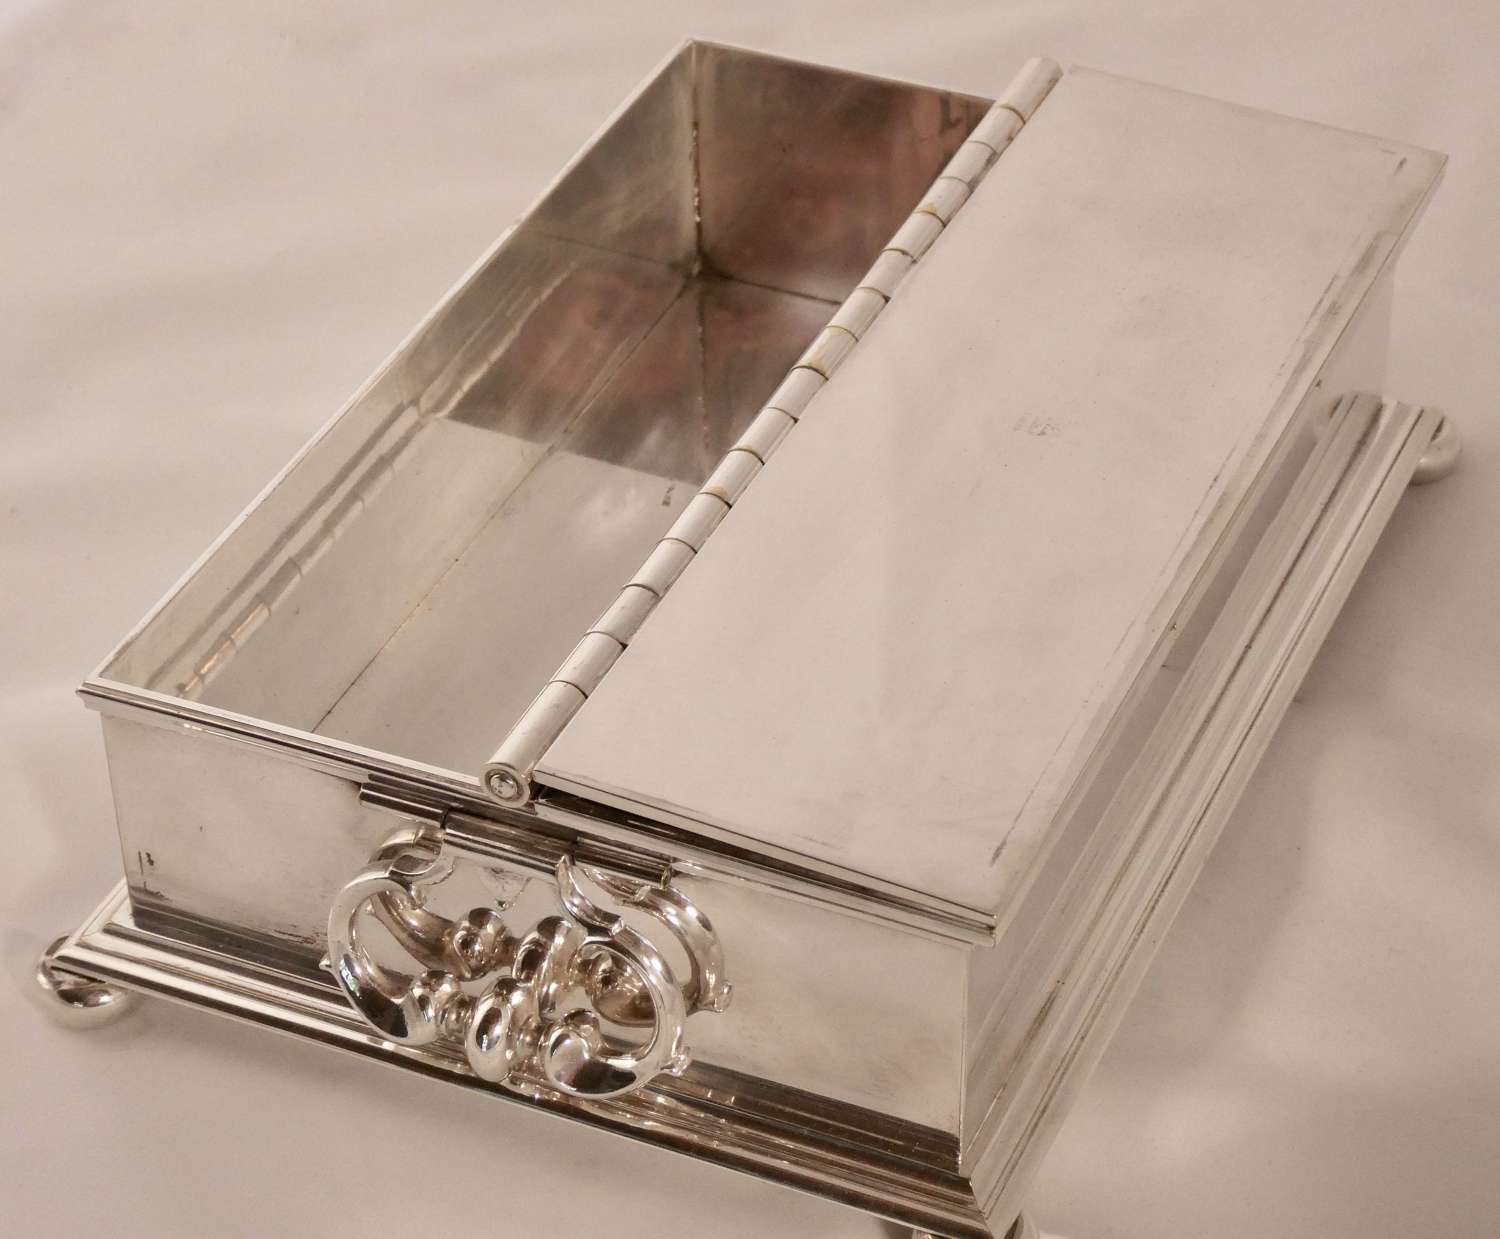 Silver plated treasury desk stand